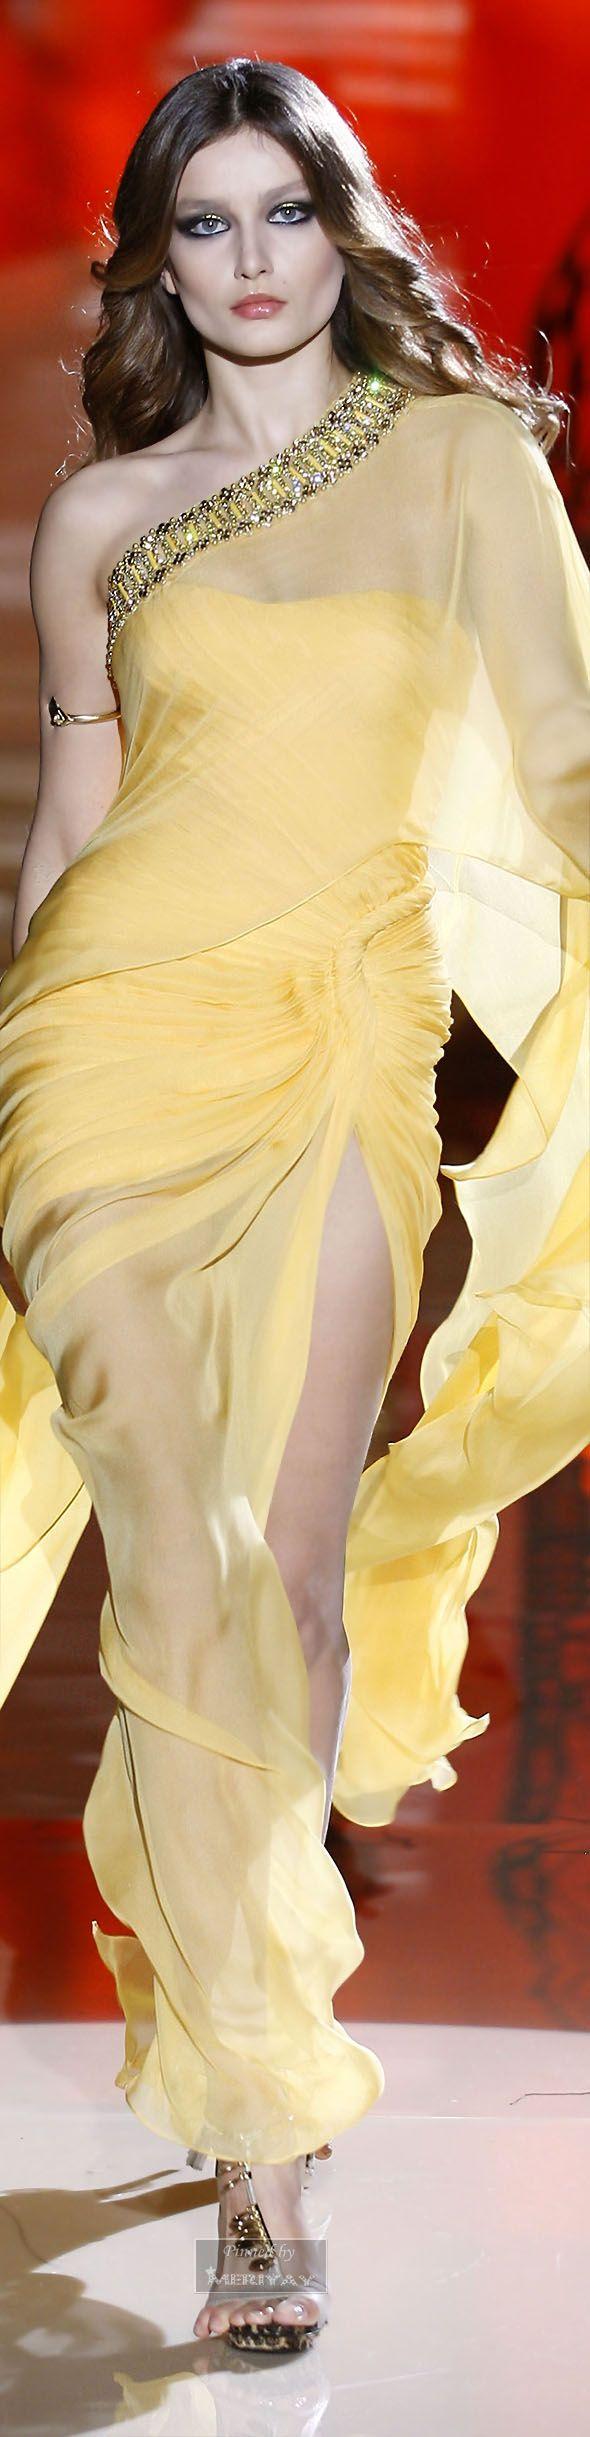 Wedding - Gowns..Yearning Yellows